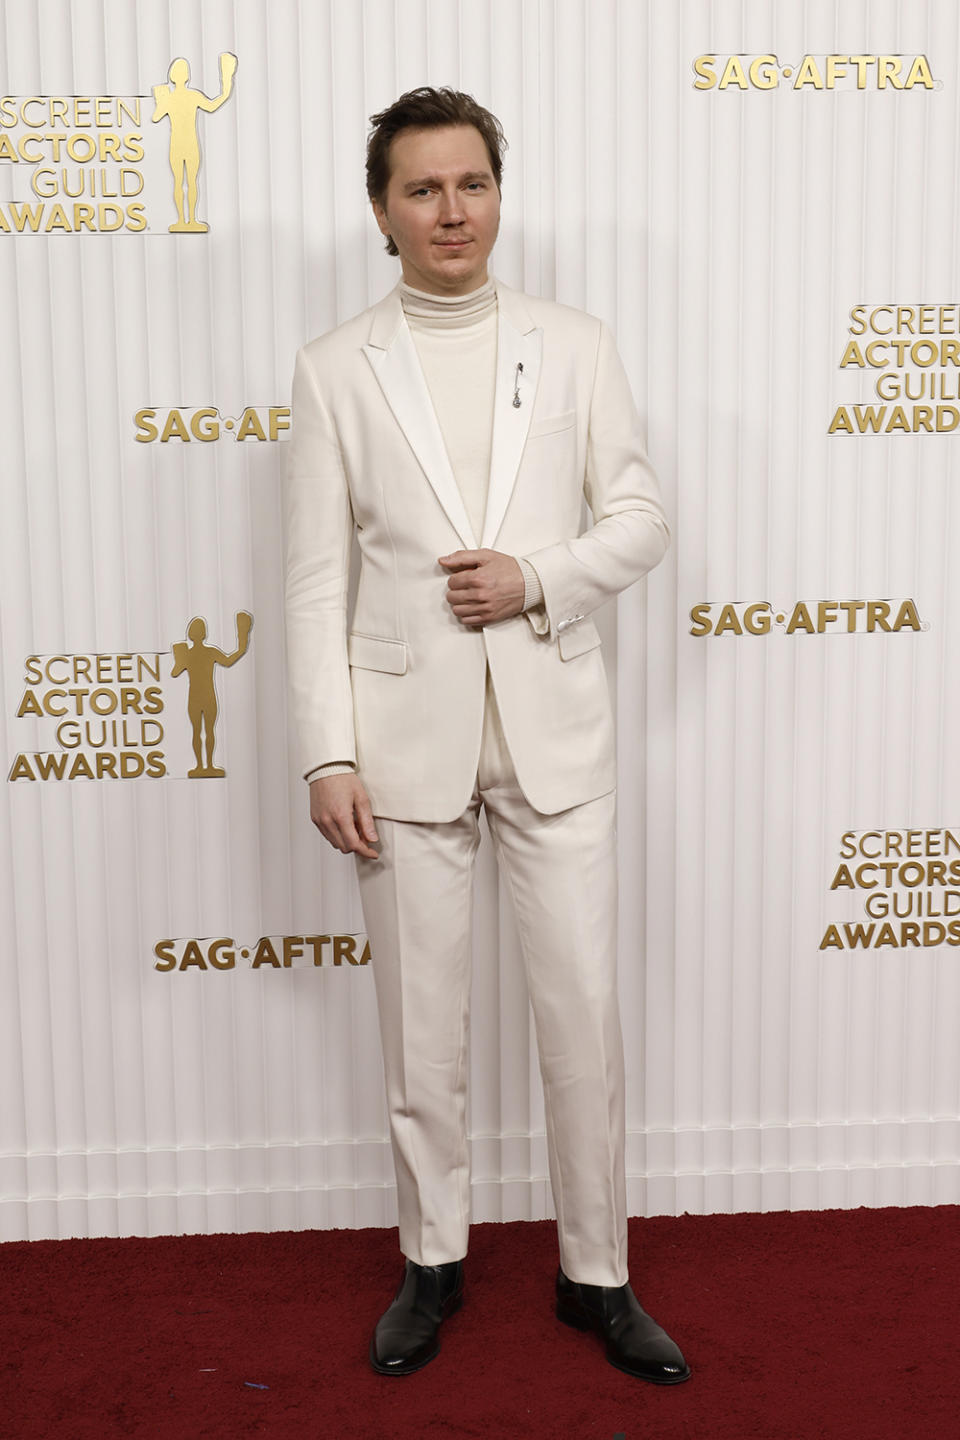 LOS ANGELES, CALIFORNIA - FEBRUARY 26: Paul Dano attends the 29th Annual Screen Actors Guild Awards at Fairmont Century Plaza on February 26, 2023 in Los Angeles, California. (Photo by Frazer Harrison/Getty Images)